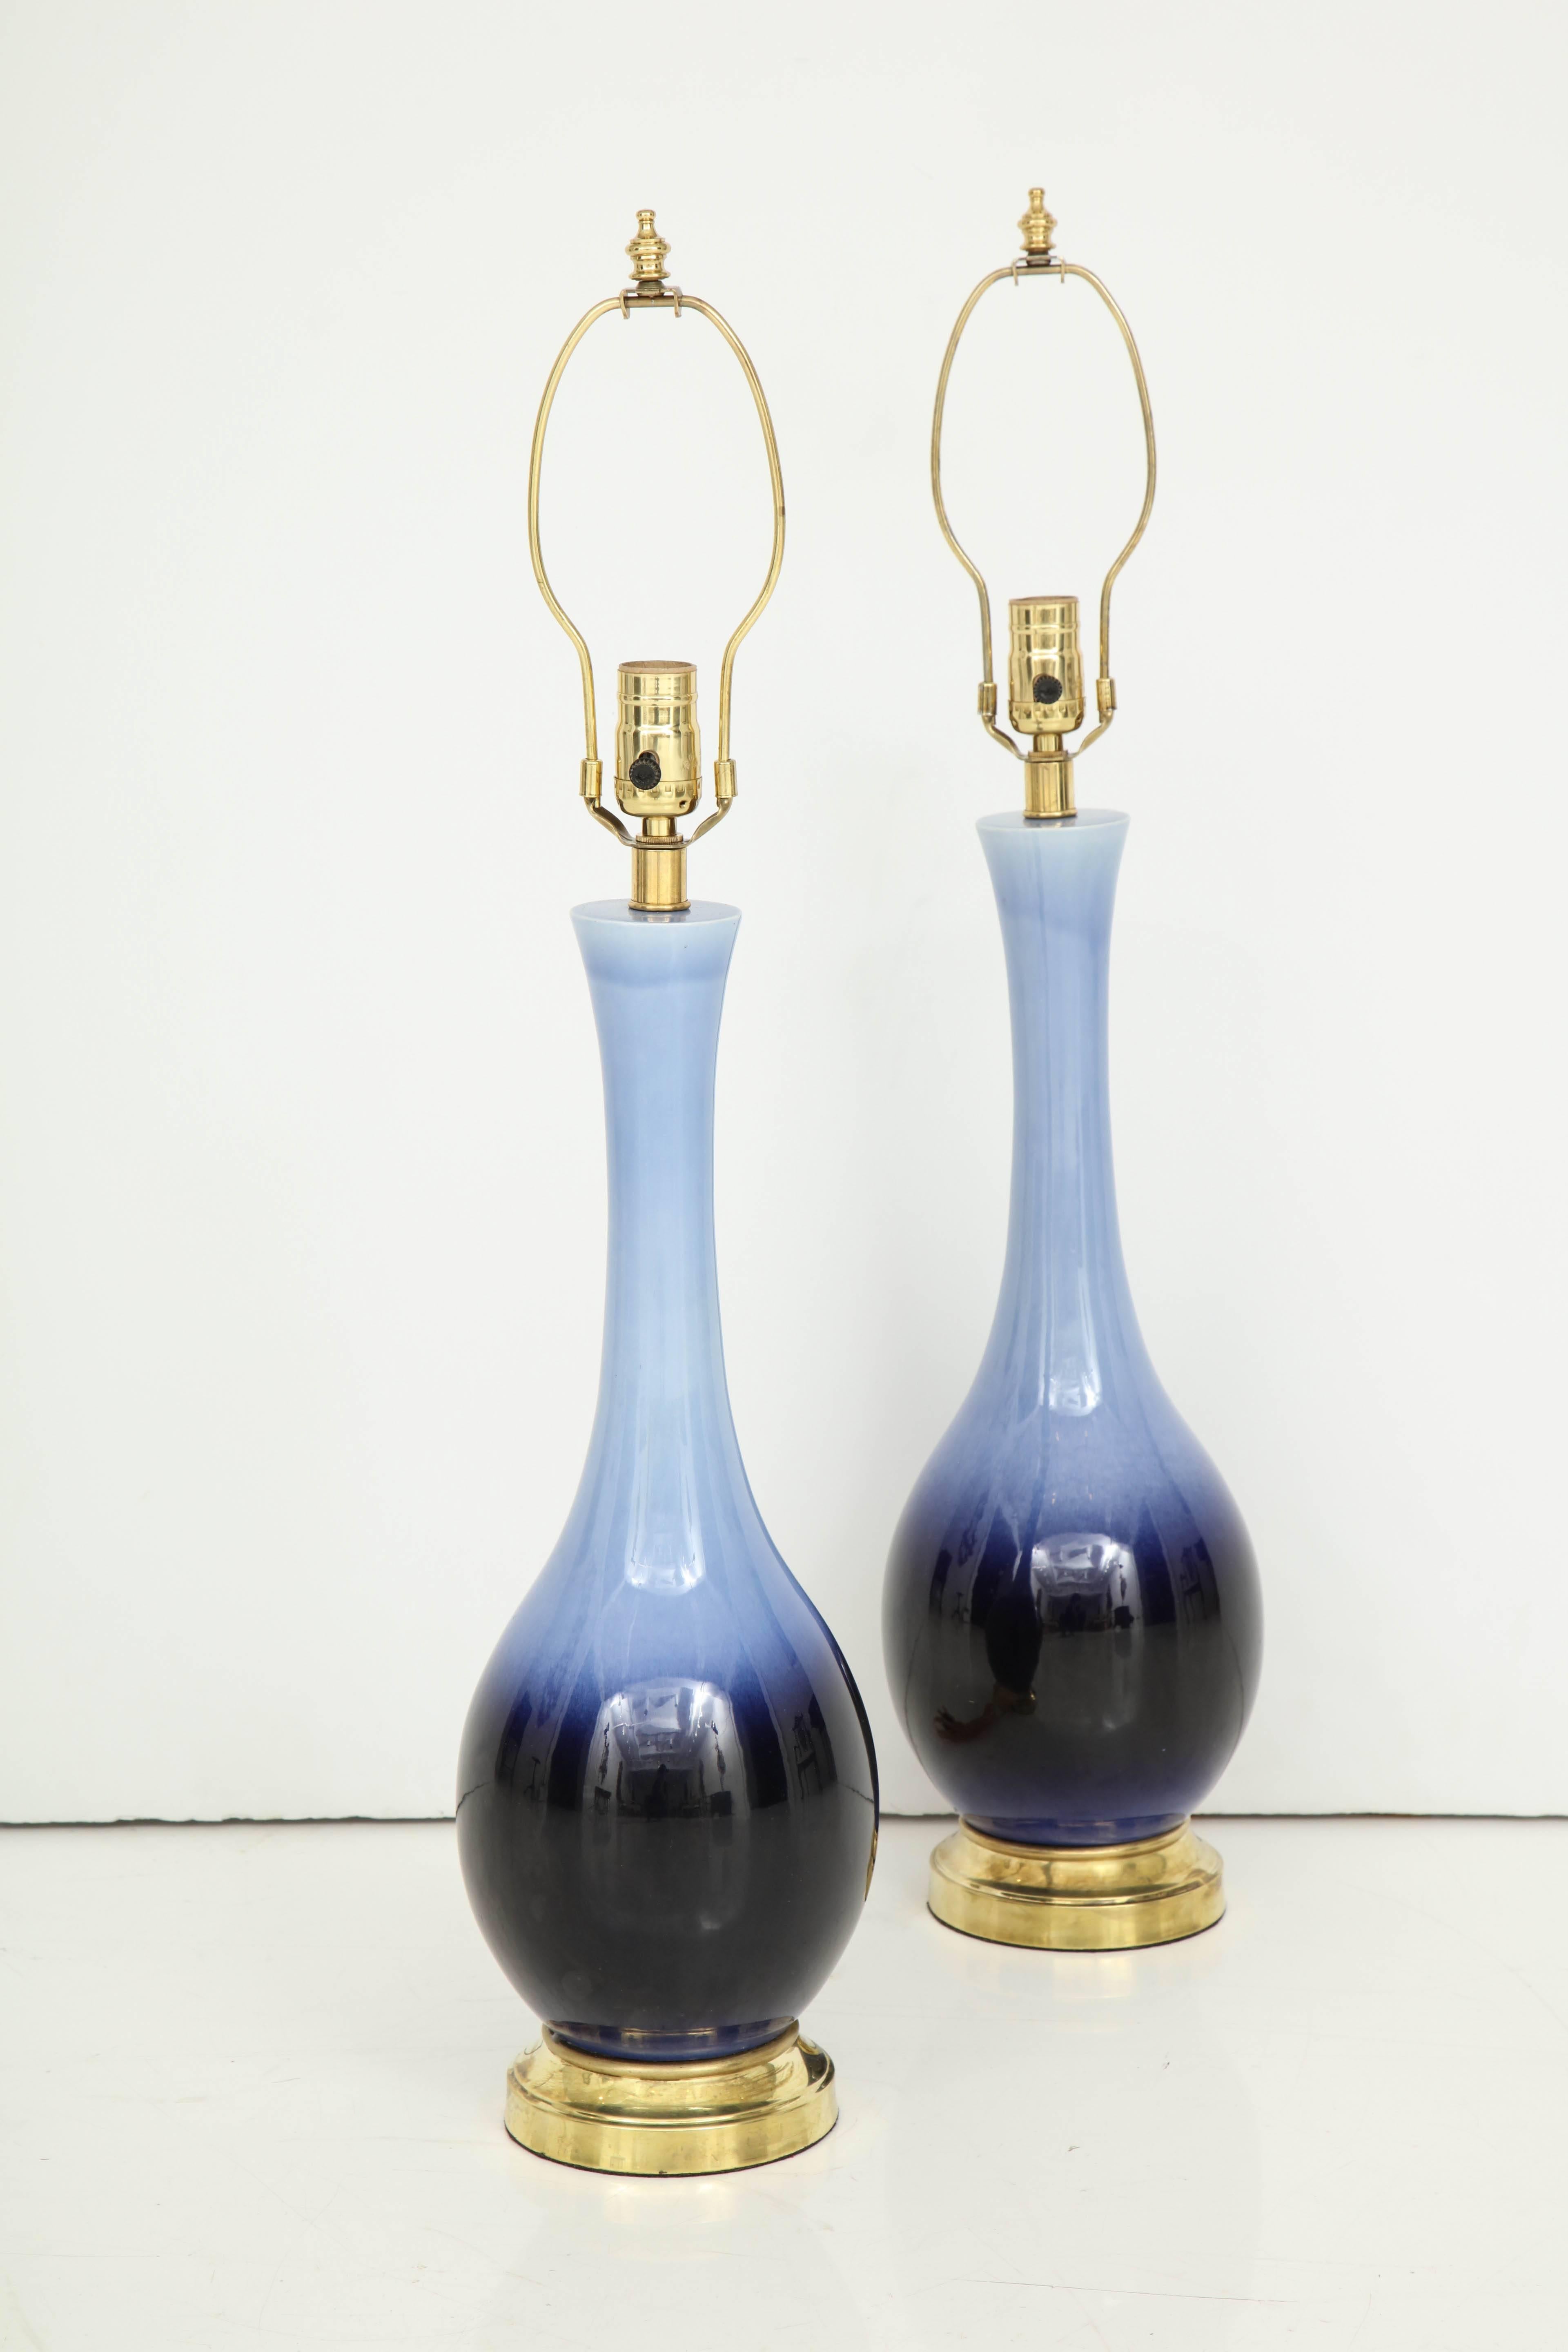 The blue glaze on these lamps transitions from a beautiful soft, pale blue to a deep indigo at the base. The urn shape lamps sit on a brass base and have brass fittings. Recently re-wired.